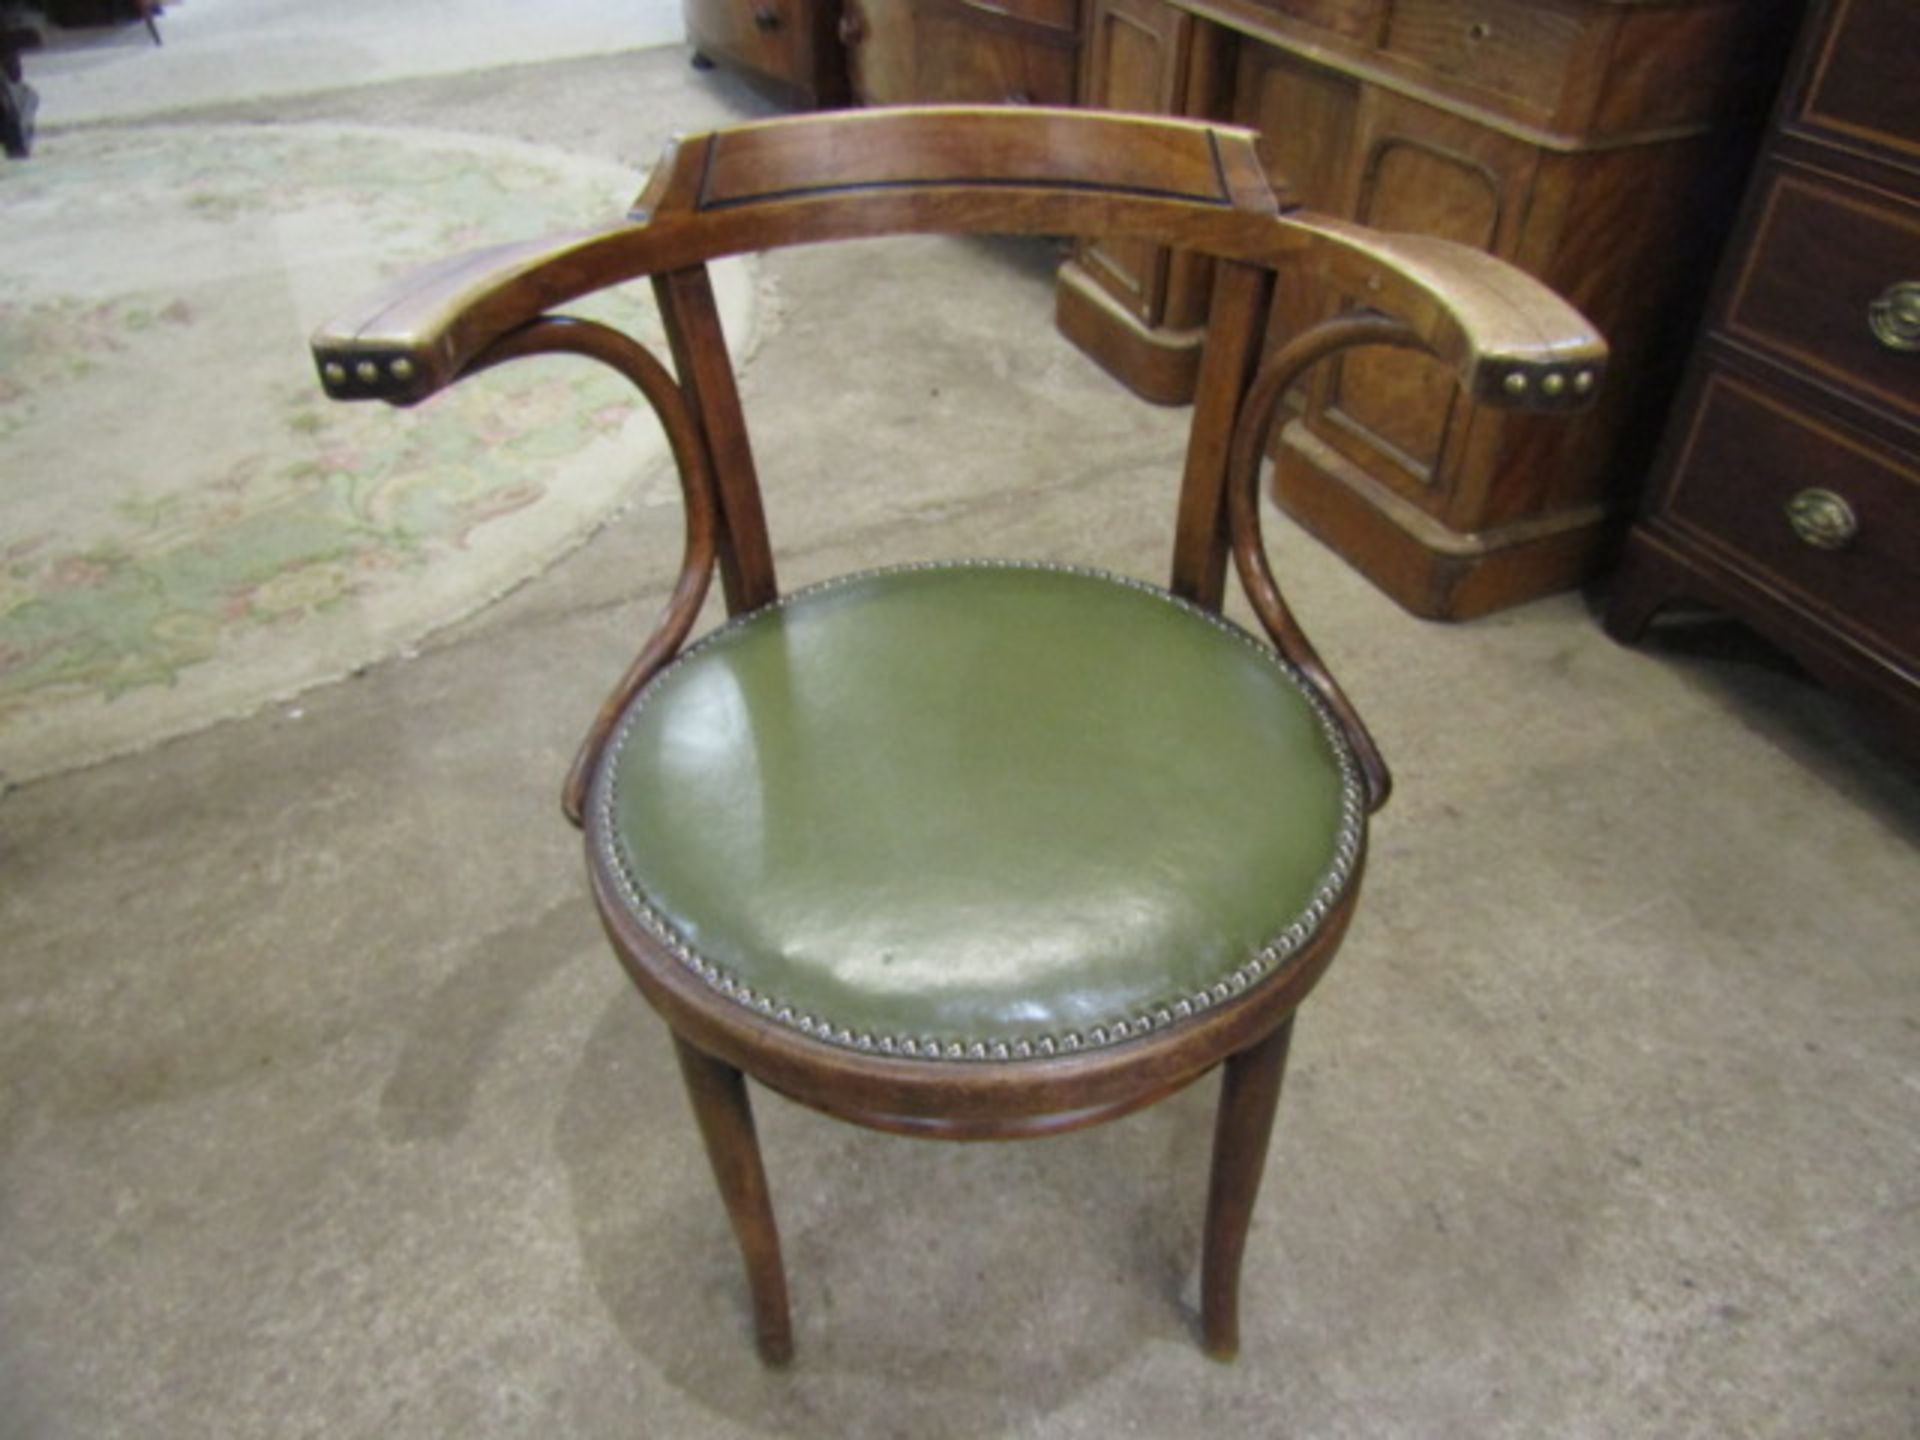 A bentwood penny seat chair with leather upholstered seat